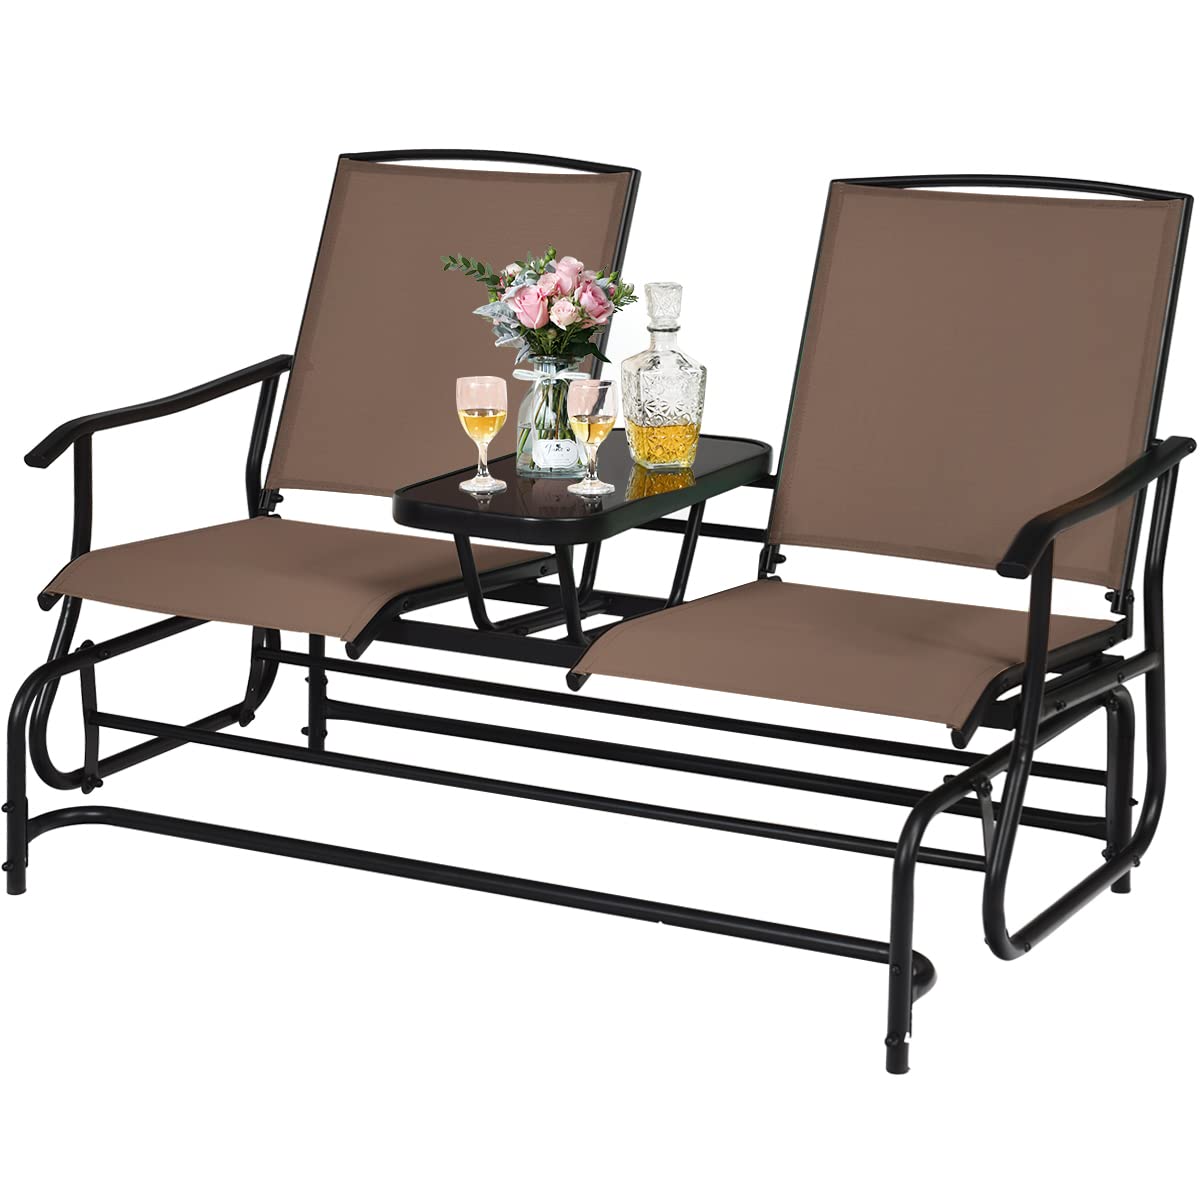 Poolside Balcony Garden Rocking Loveseat for Patio Mesh Fabric Rocking Chair w/Center Tempered Glass Table Black Giantex 2 Person Outdoor Double Glider Chair 